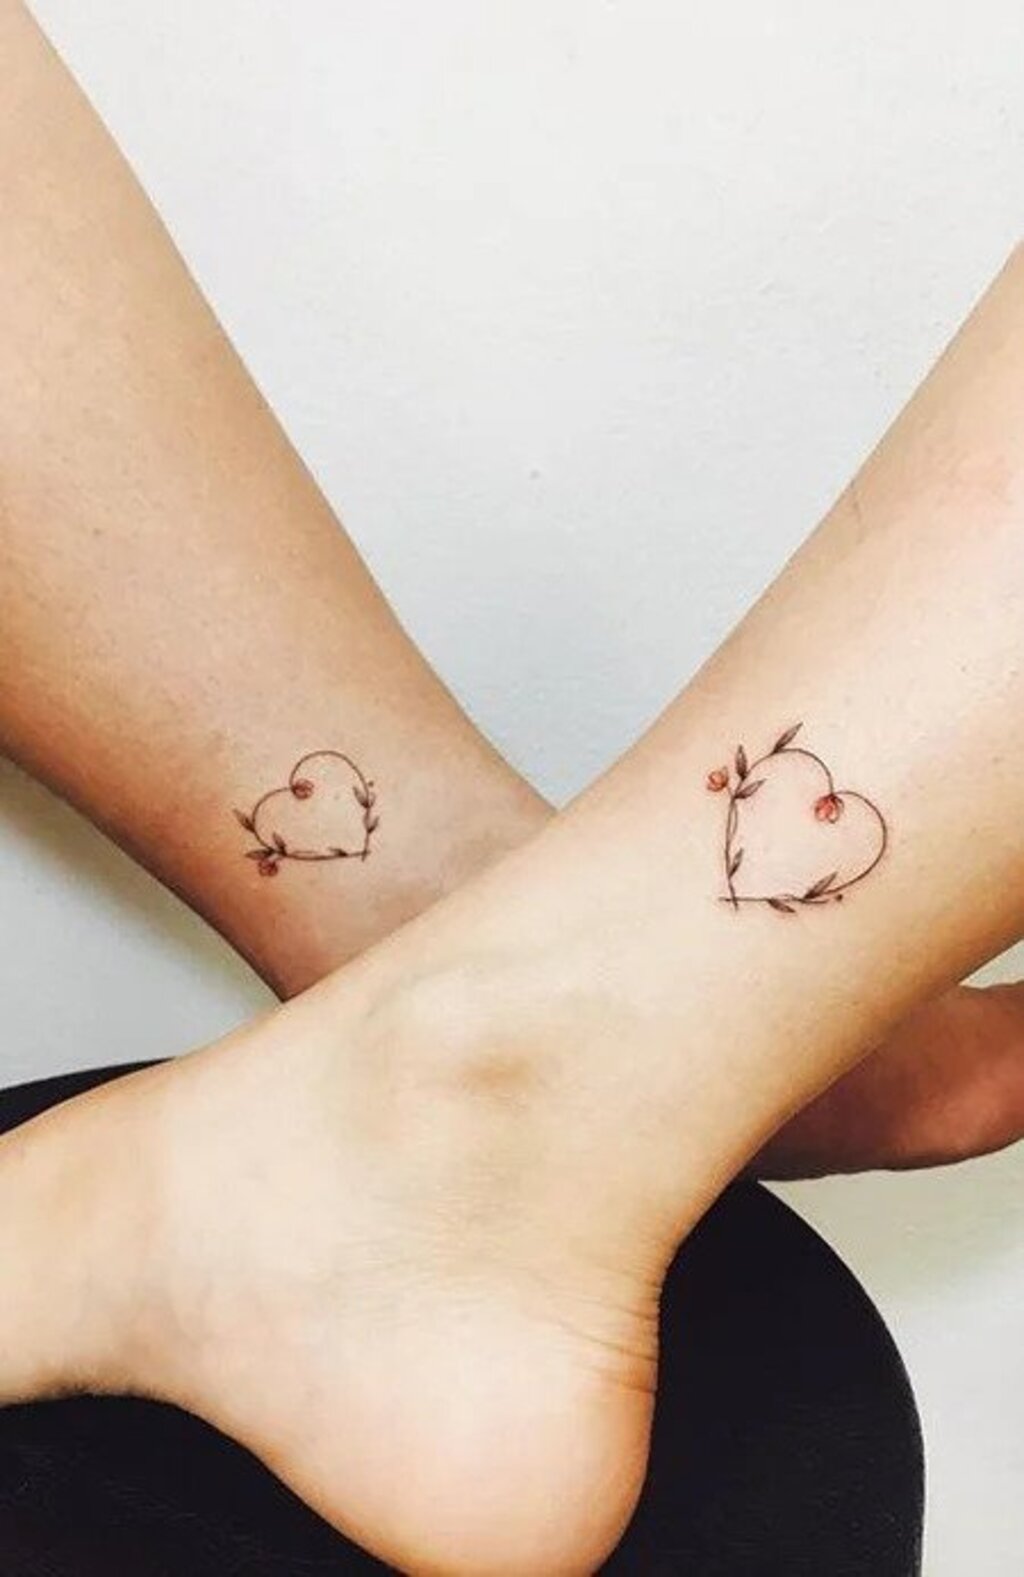 79 Hearty Matching Best Friend Tattoos with Meanings